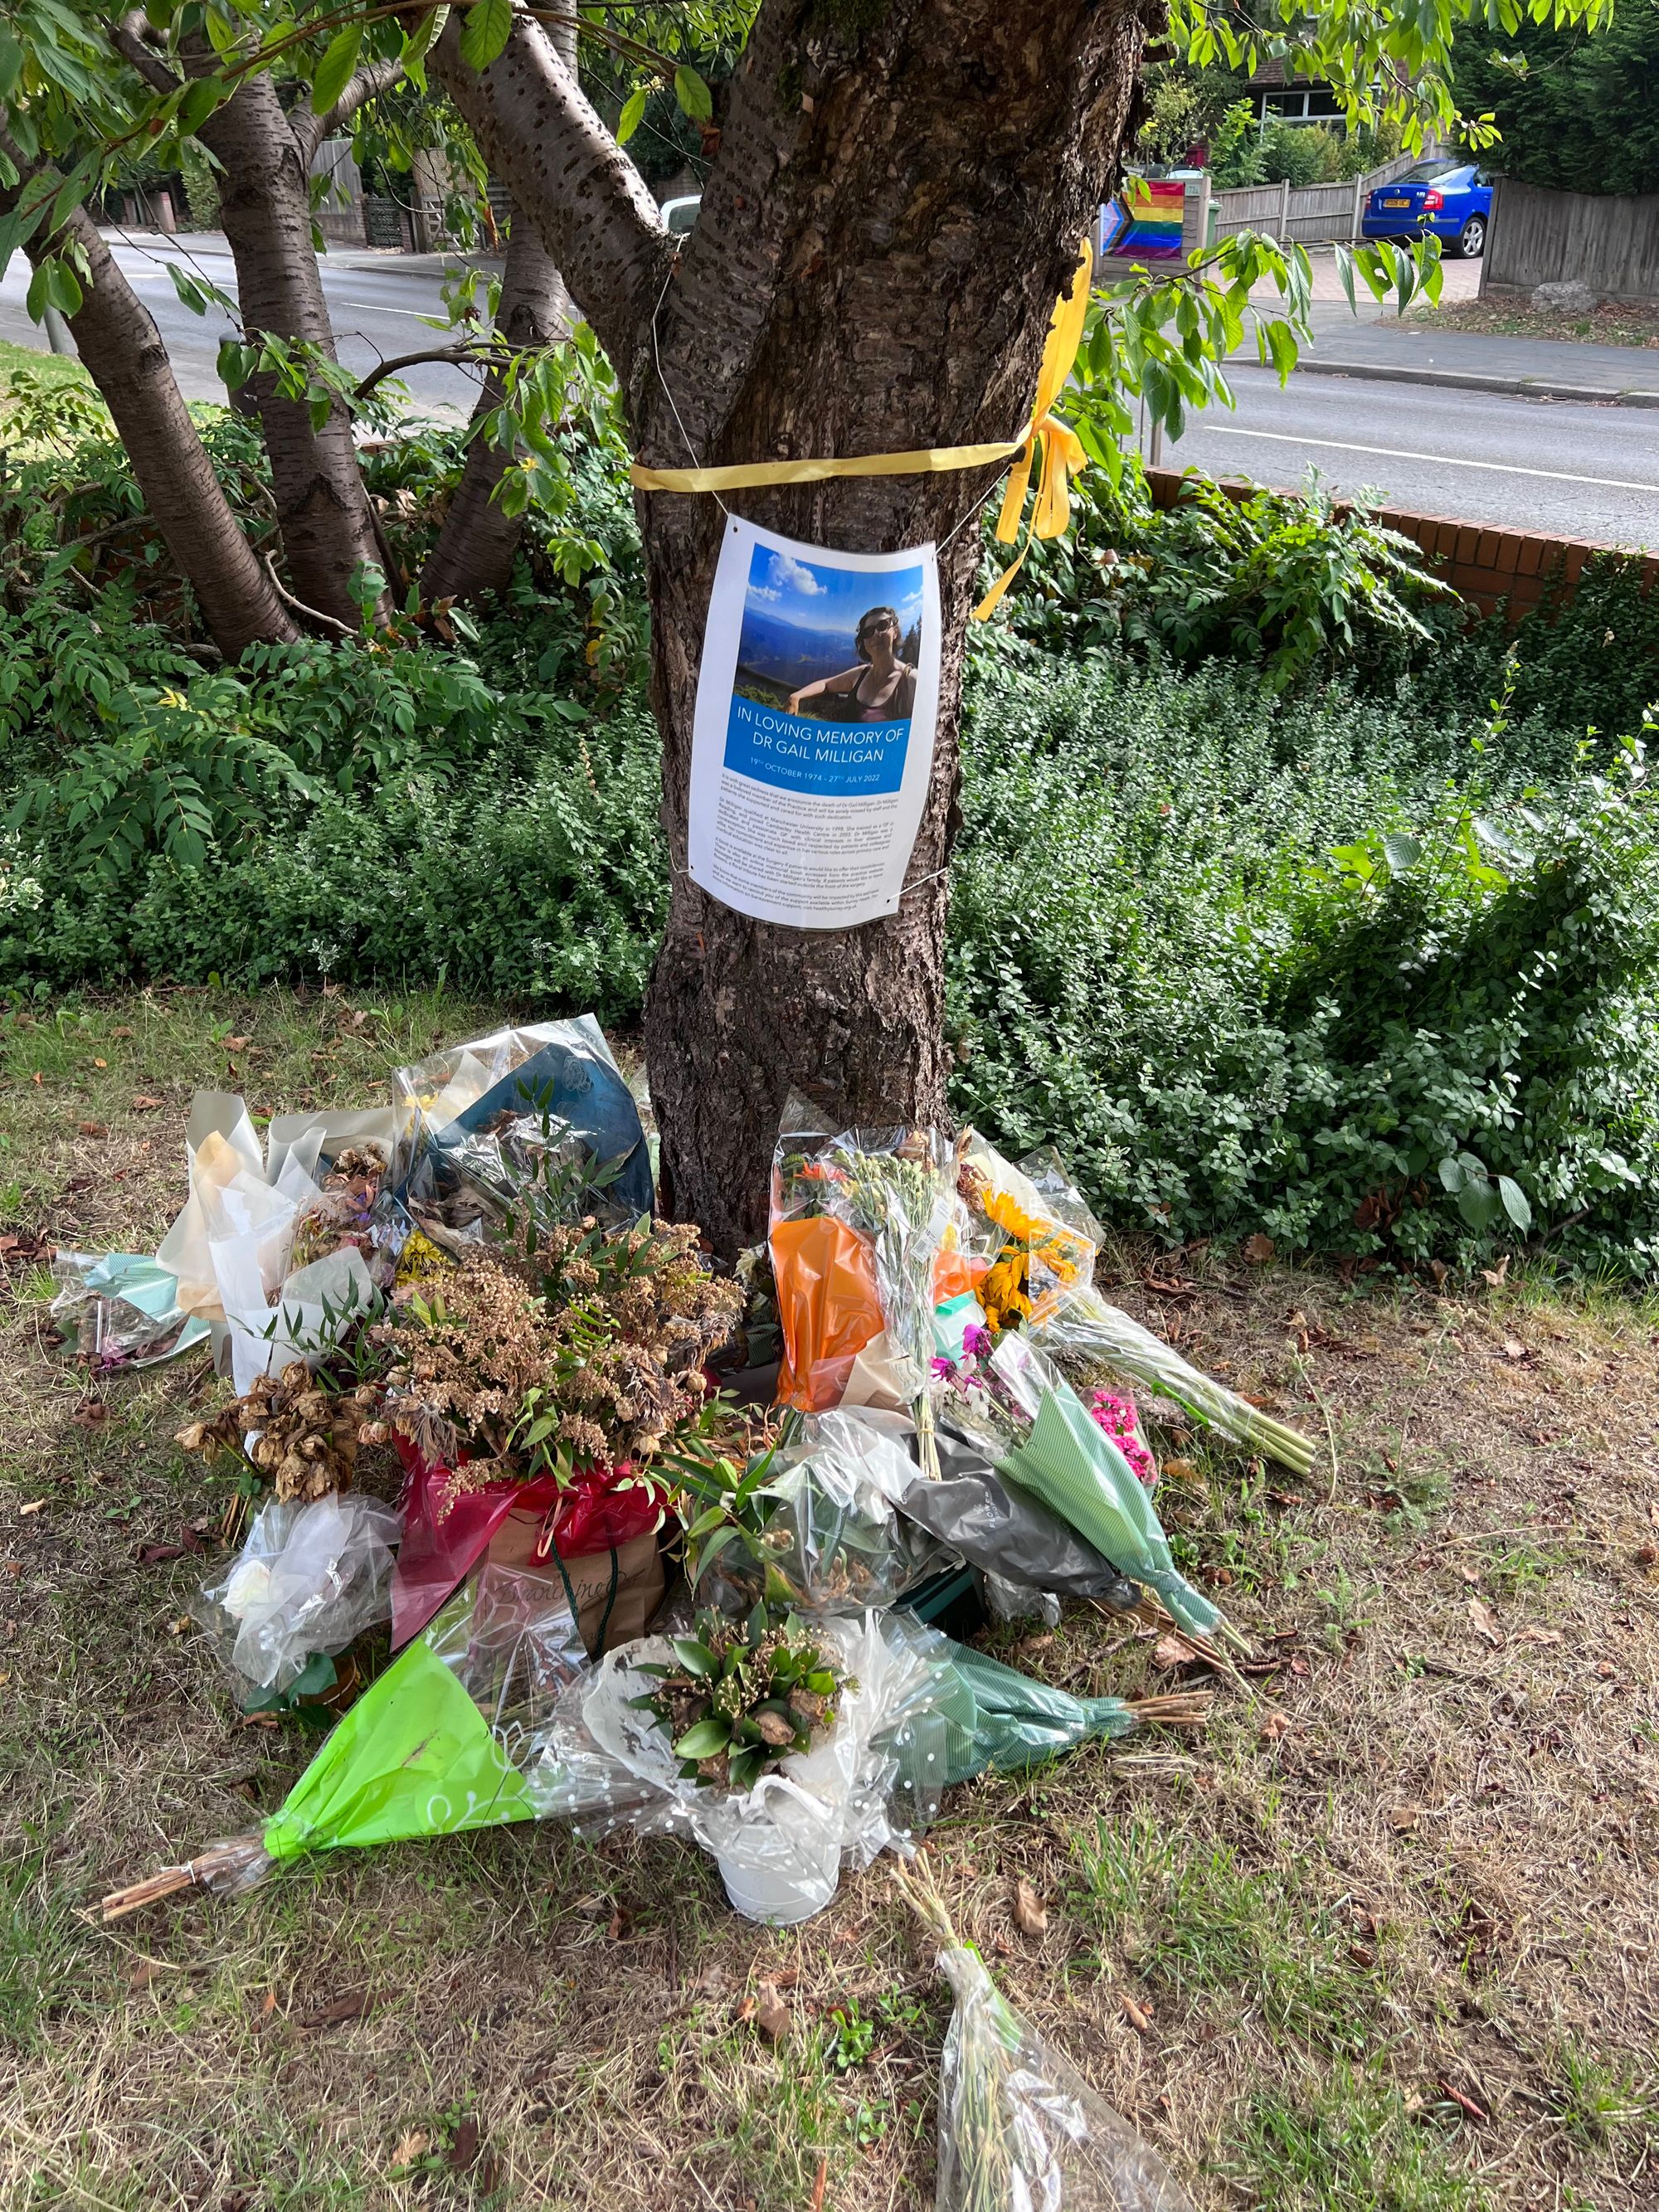 floral tributes left by a tree with a yellow band around it and a picture and notice reading “In loving memory of Dr. Gail Milligan.”